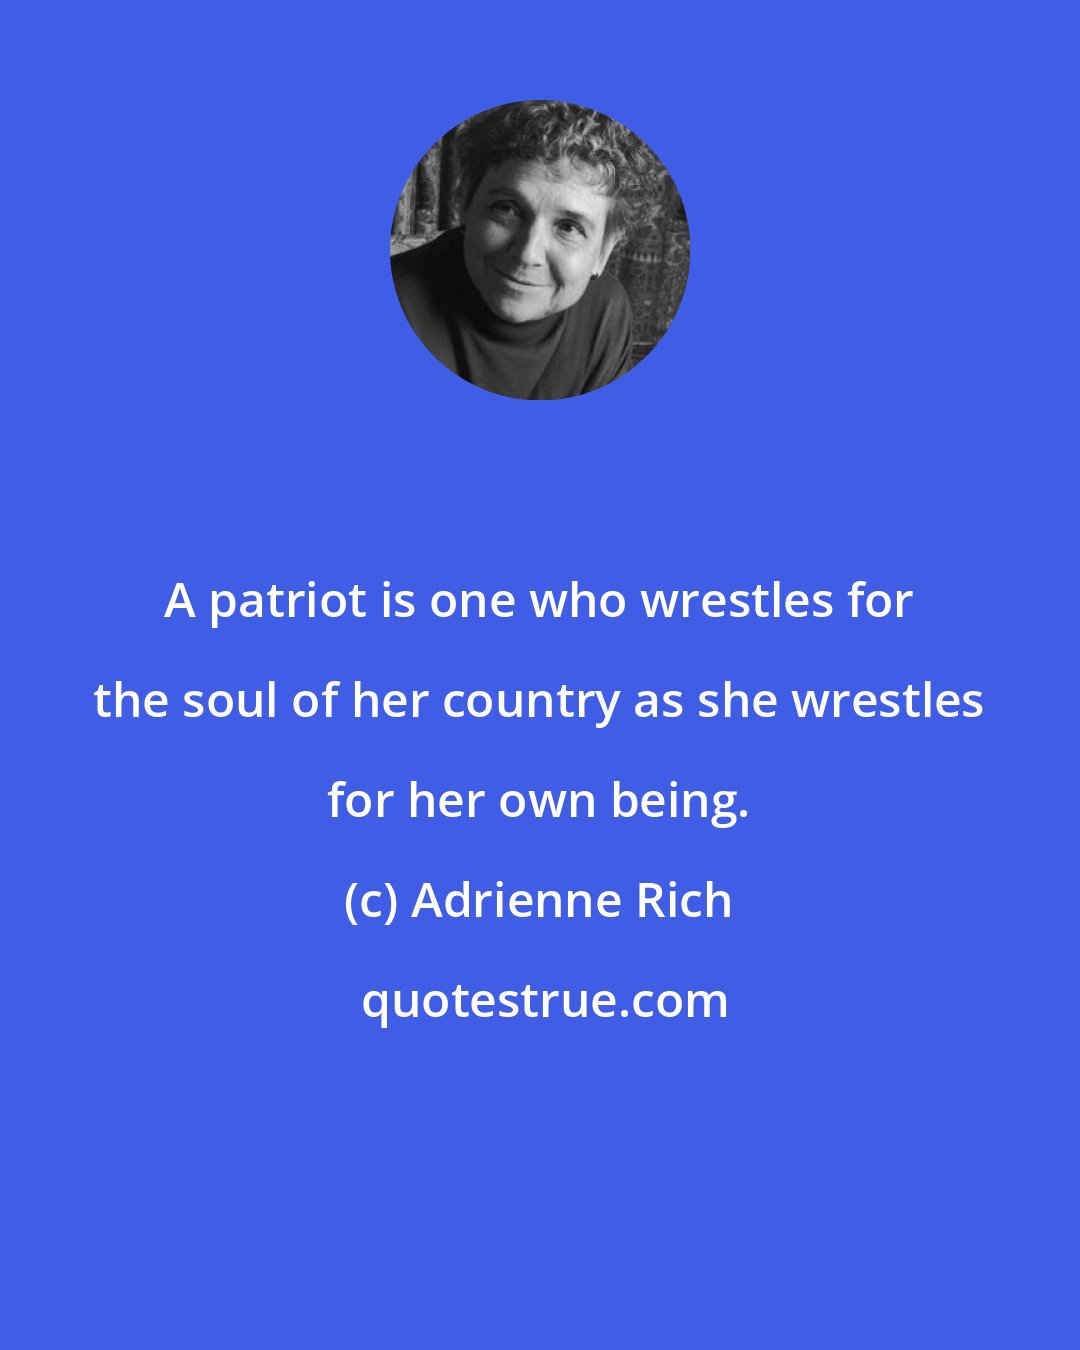 Adrienne Rich: A patriot is one who wrestles for the soul of her country as she wrestles for her own being.